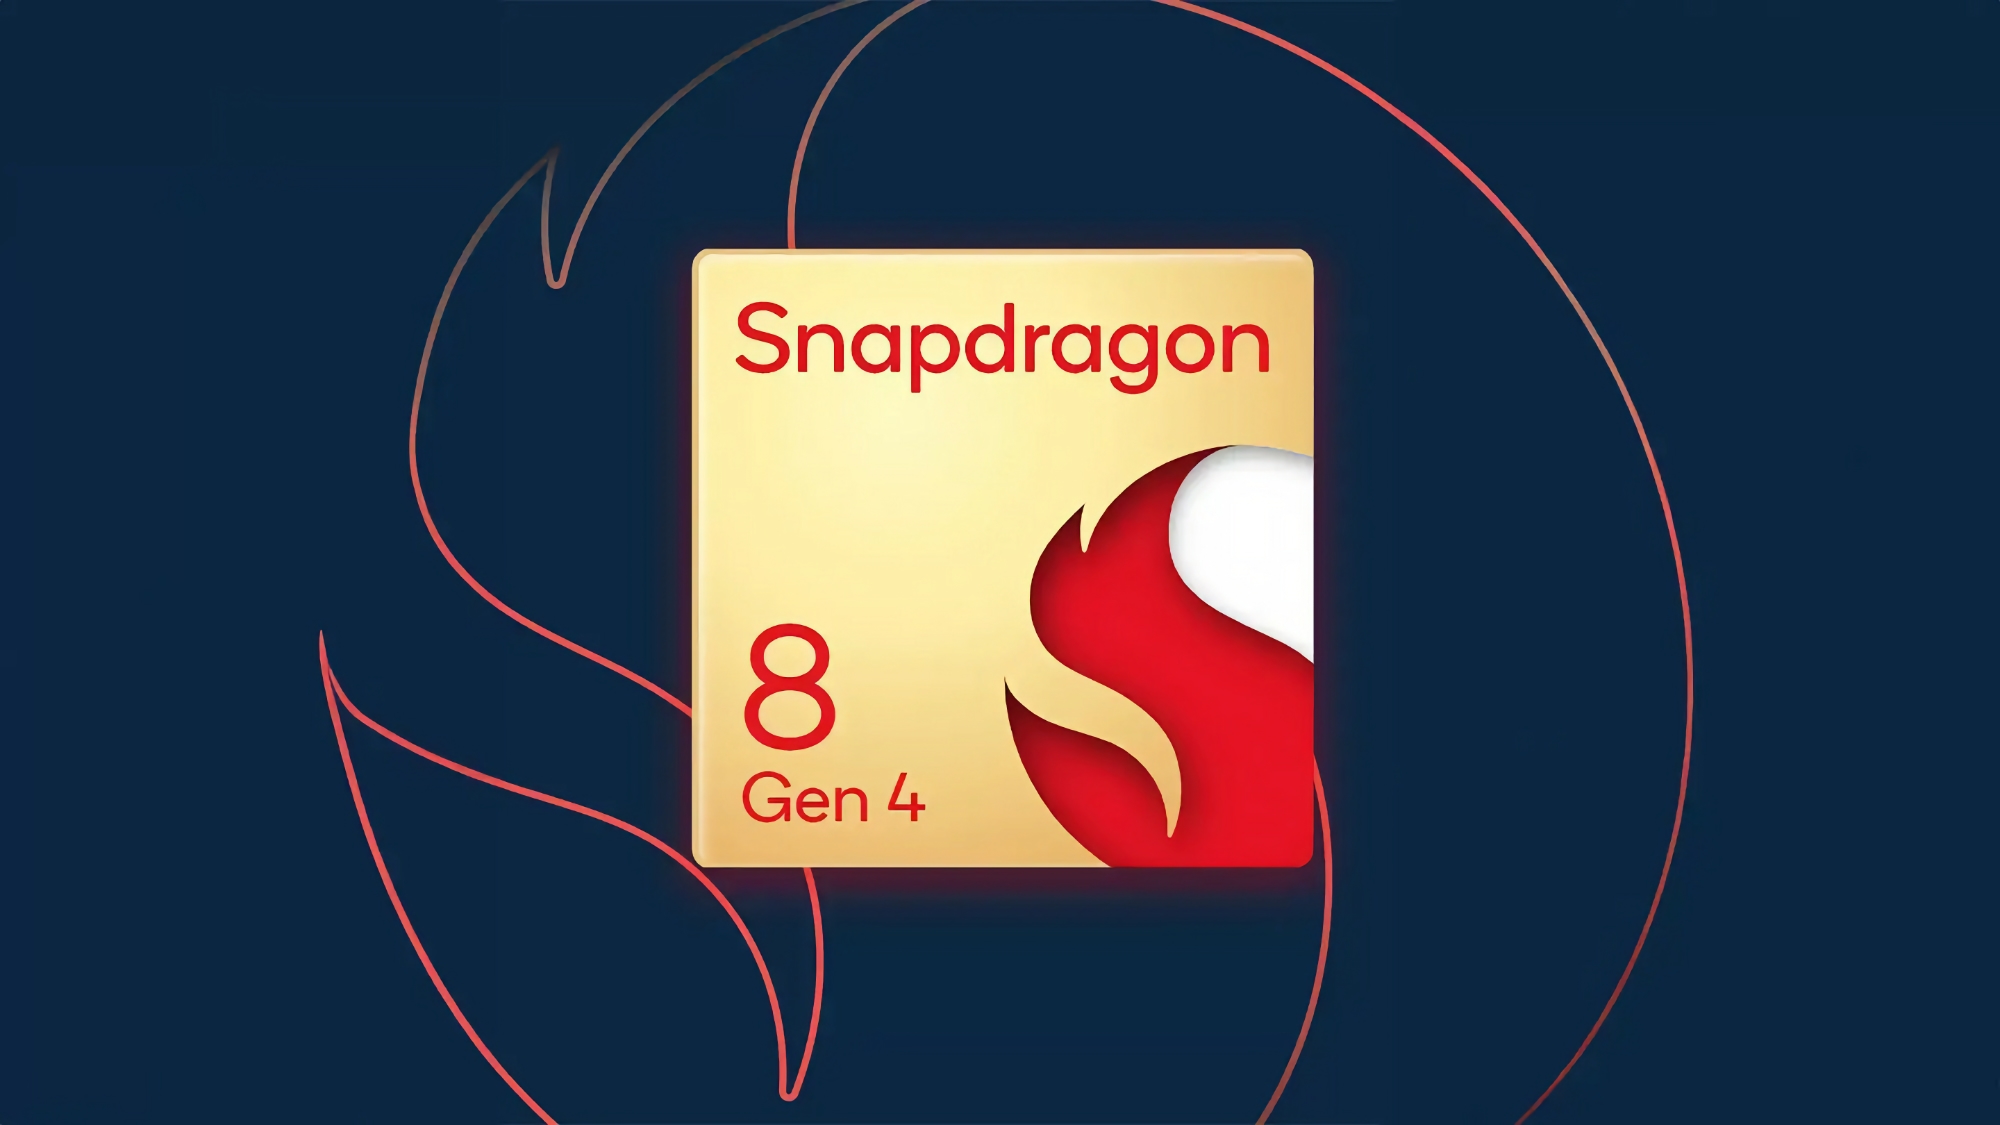 Qualcomm has revealed the release date of Snapdragon 8 Gen 4